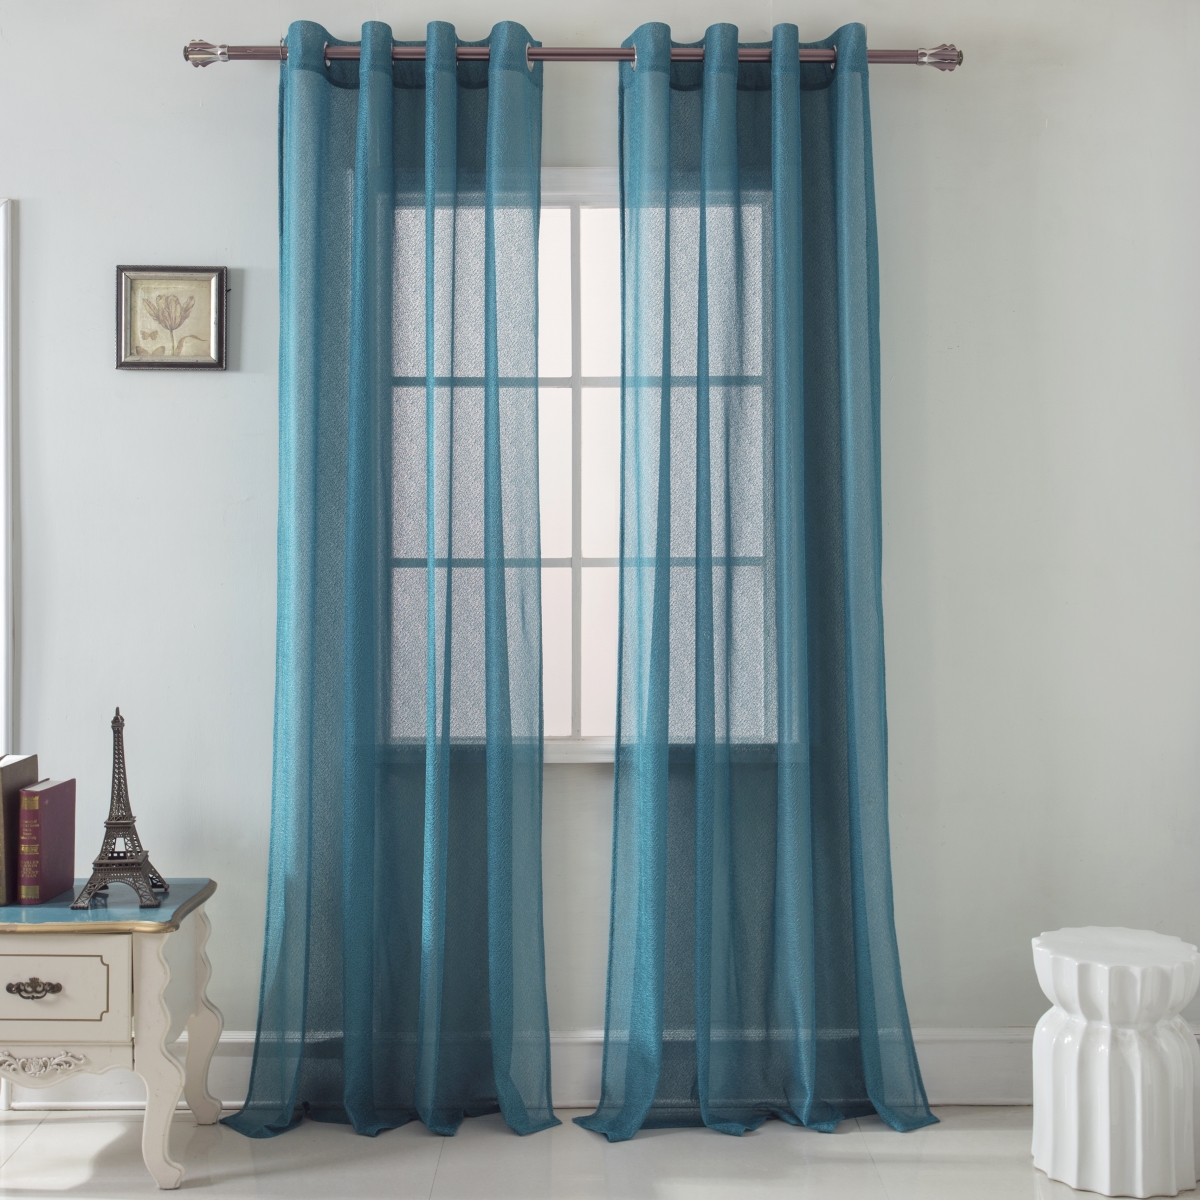 Pns15991 54 X 90 In. Spyder Lace Grommet Single Curtain Panel, Teal